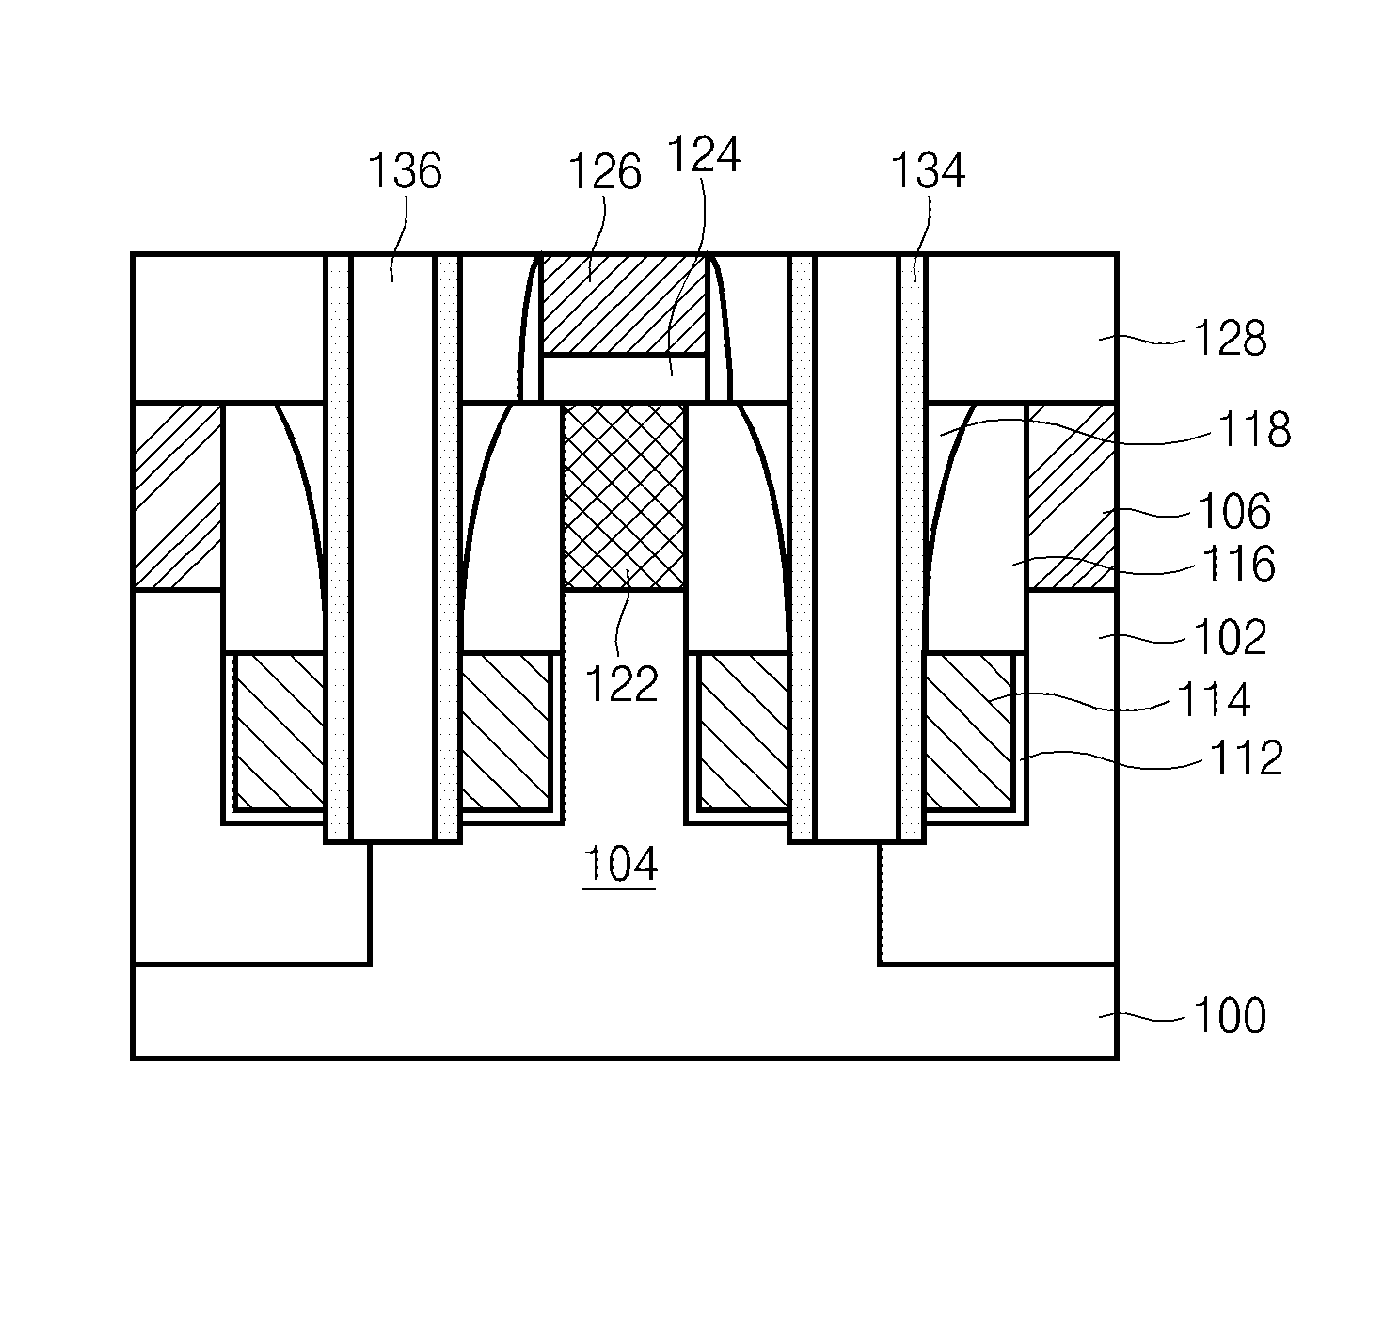 Semiconductor device and method for forming the same